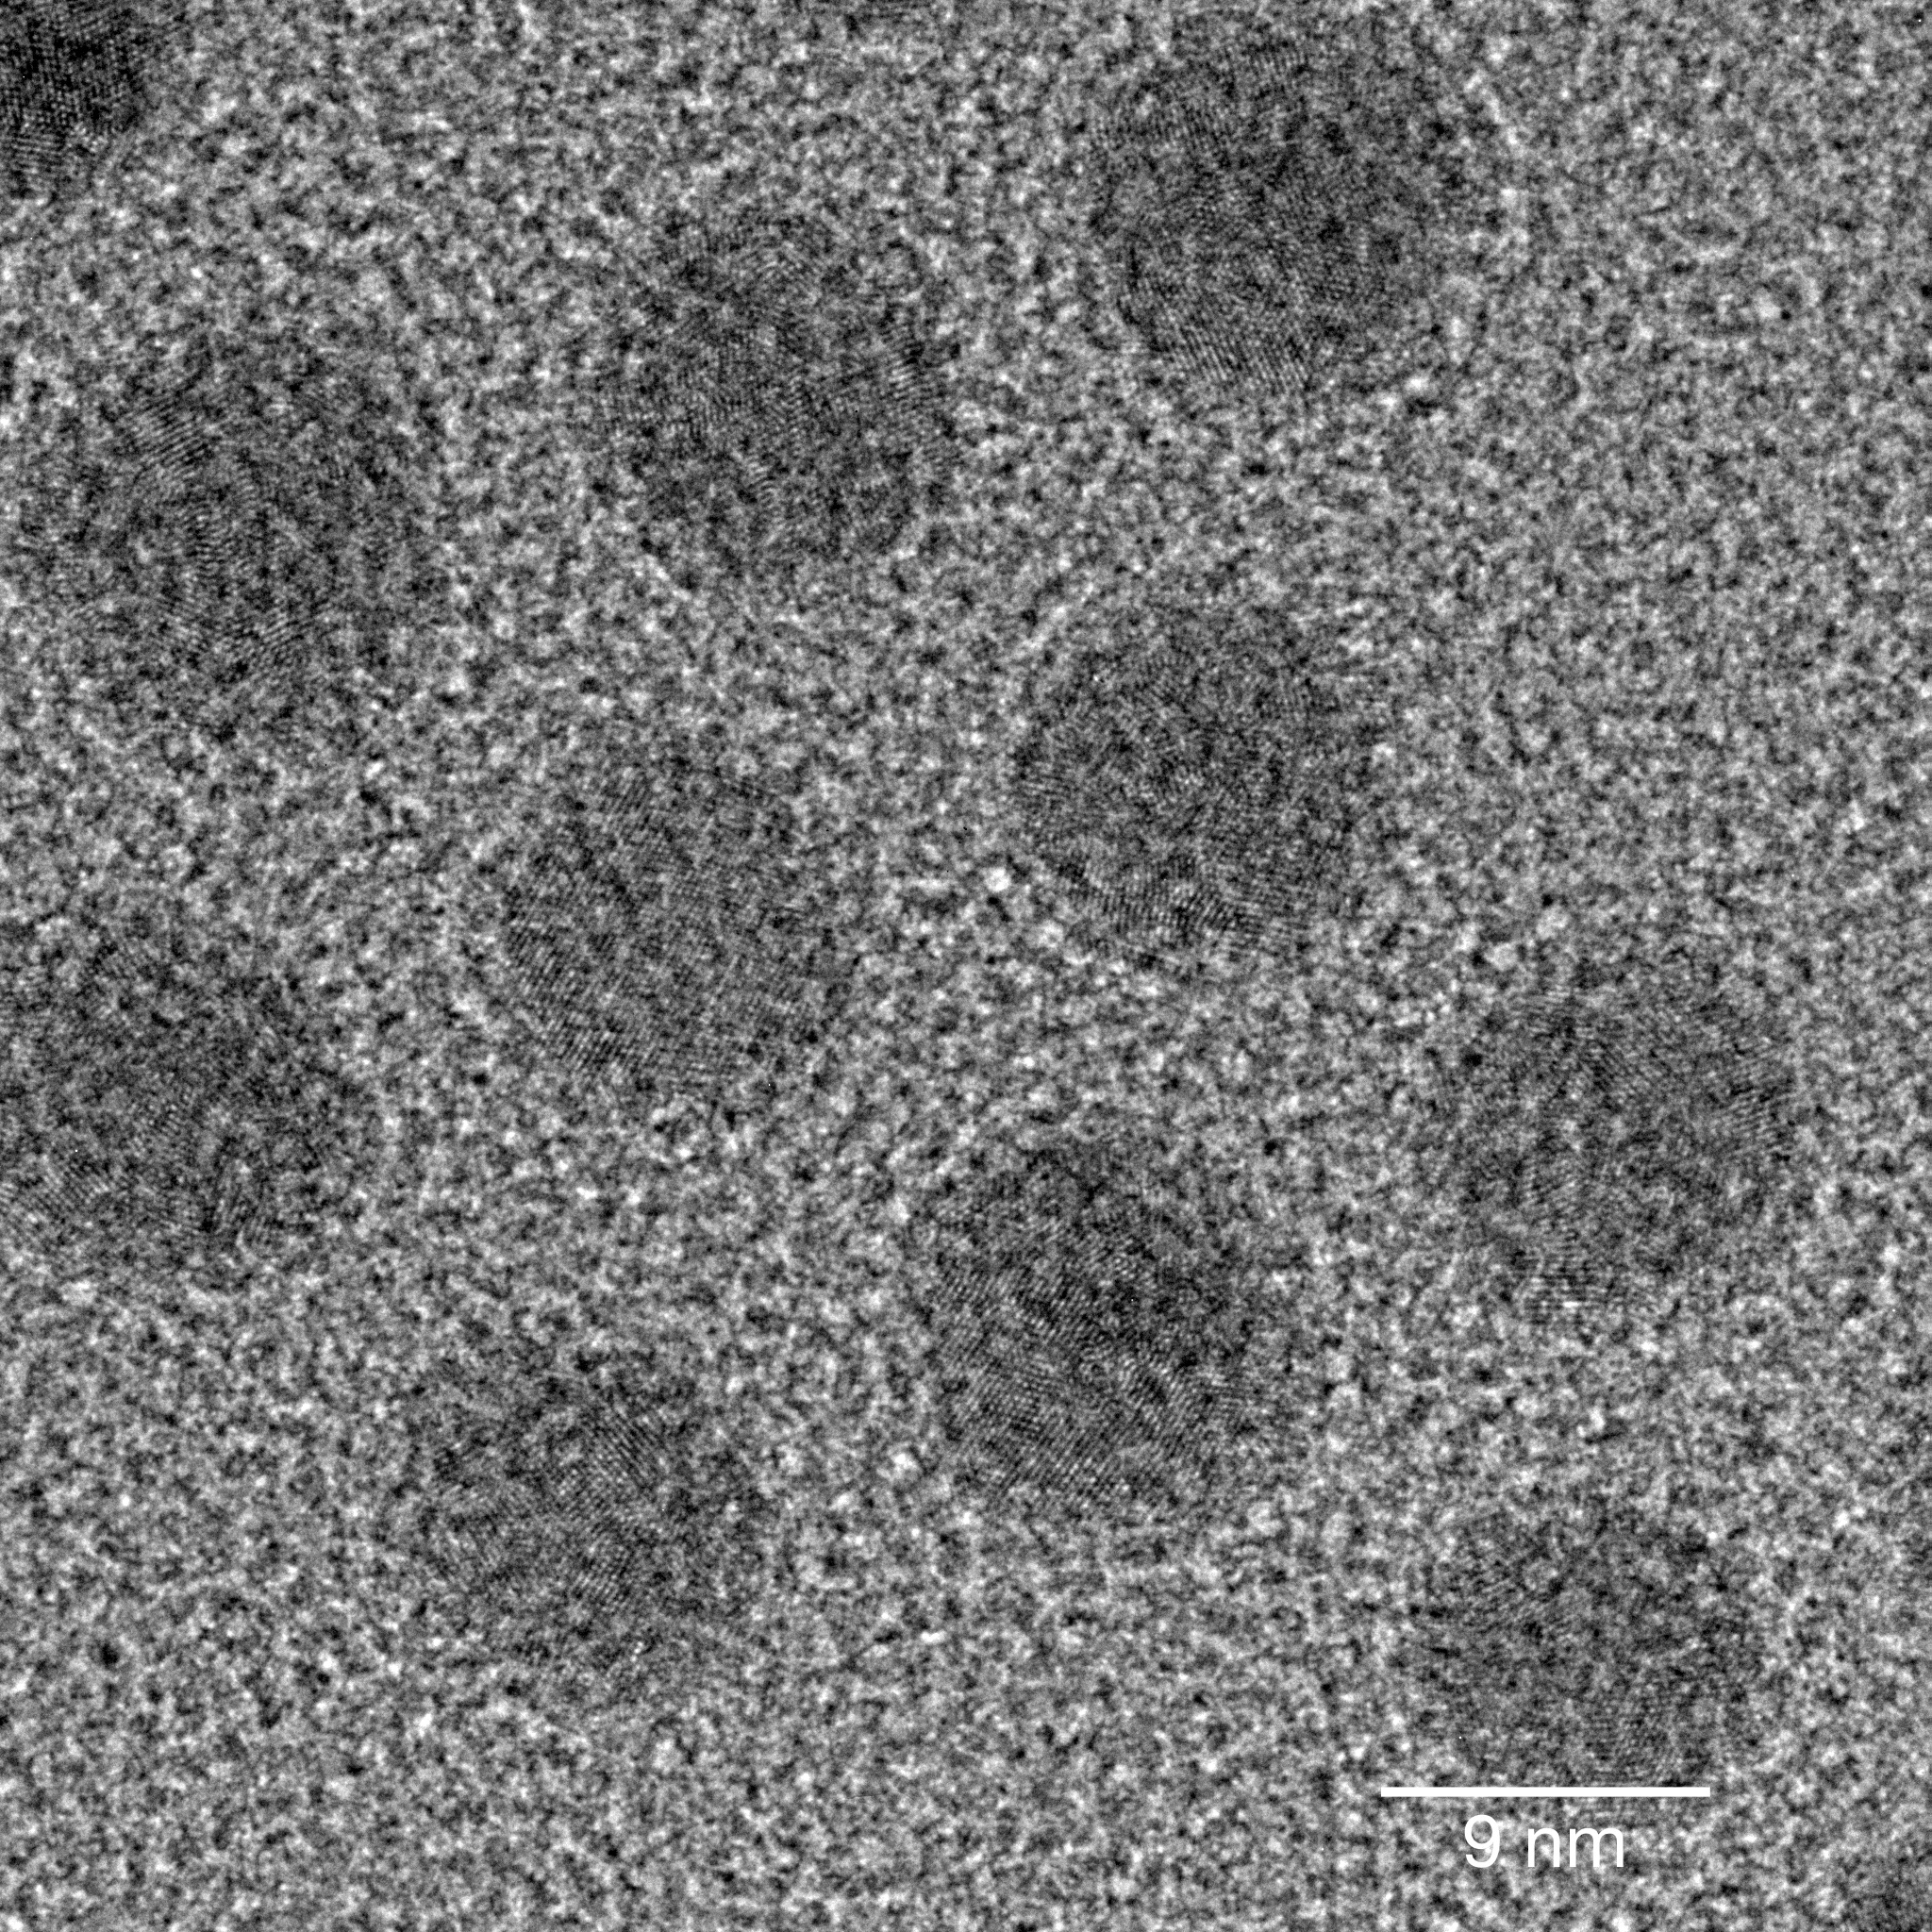 Oxidatively Stable Cobalt Nanoparticles